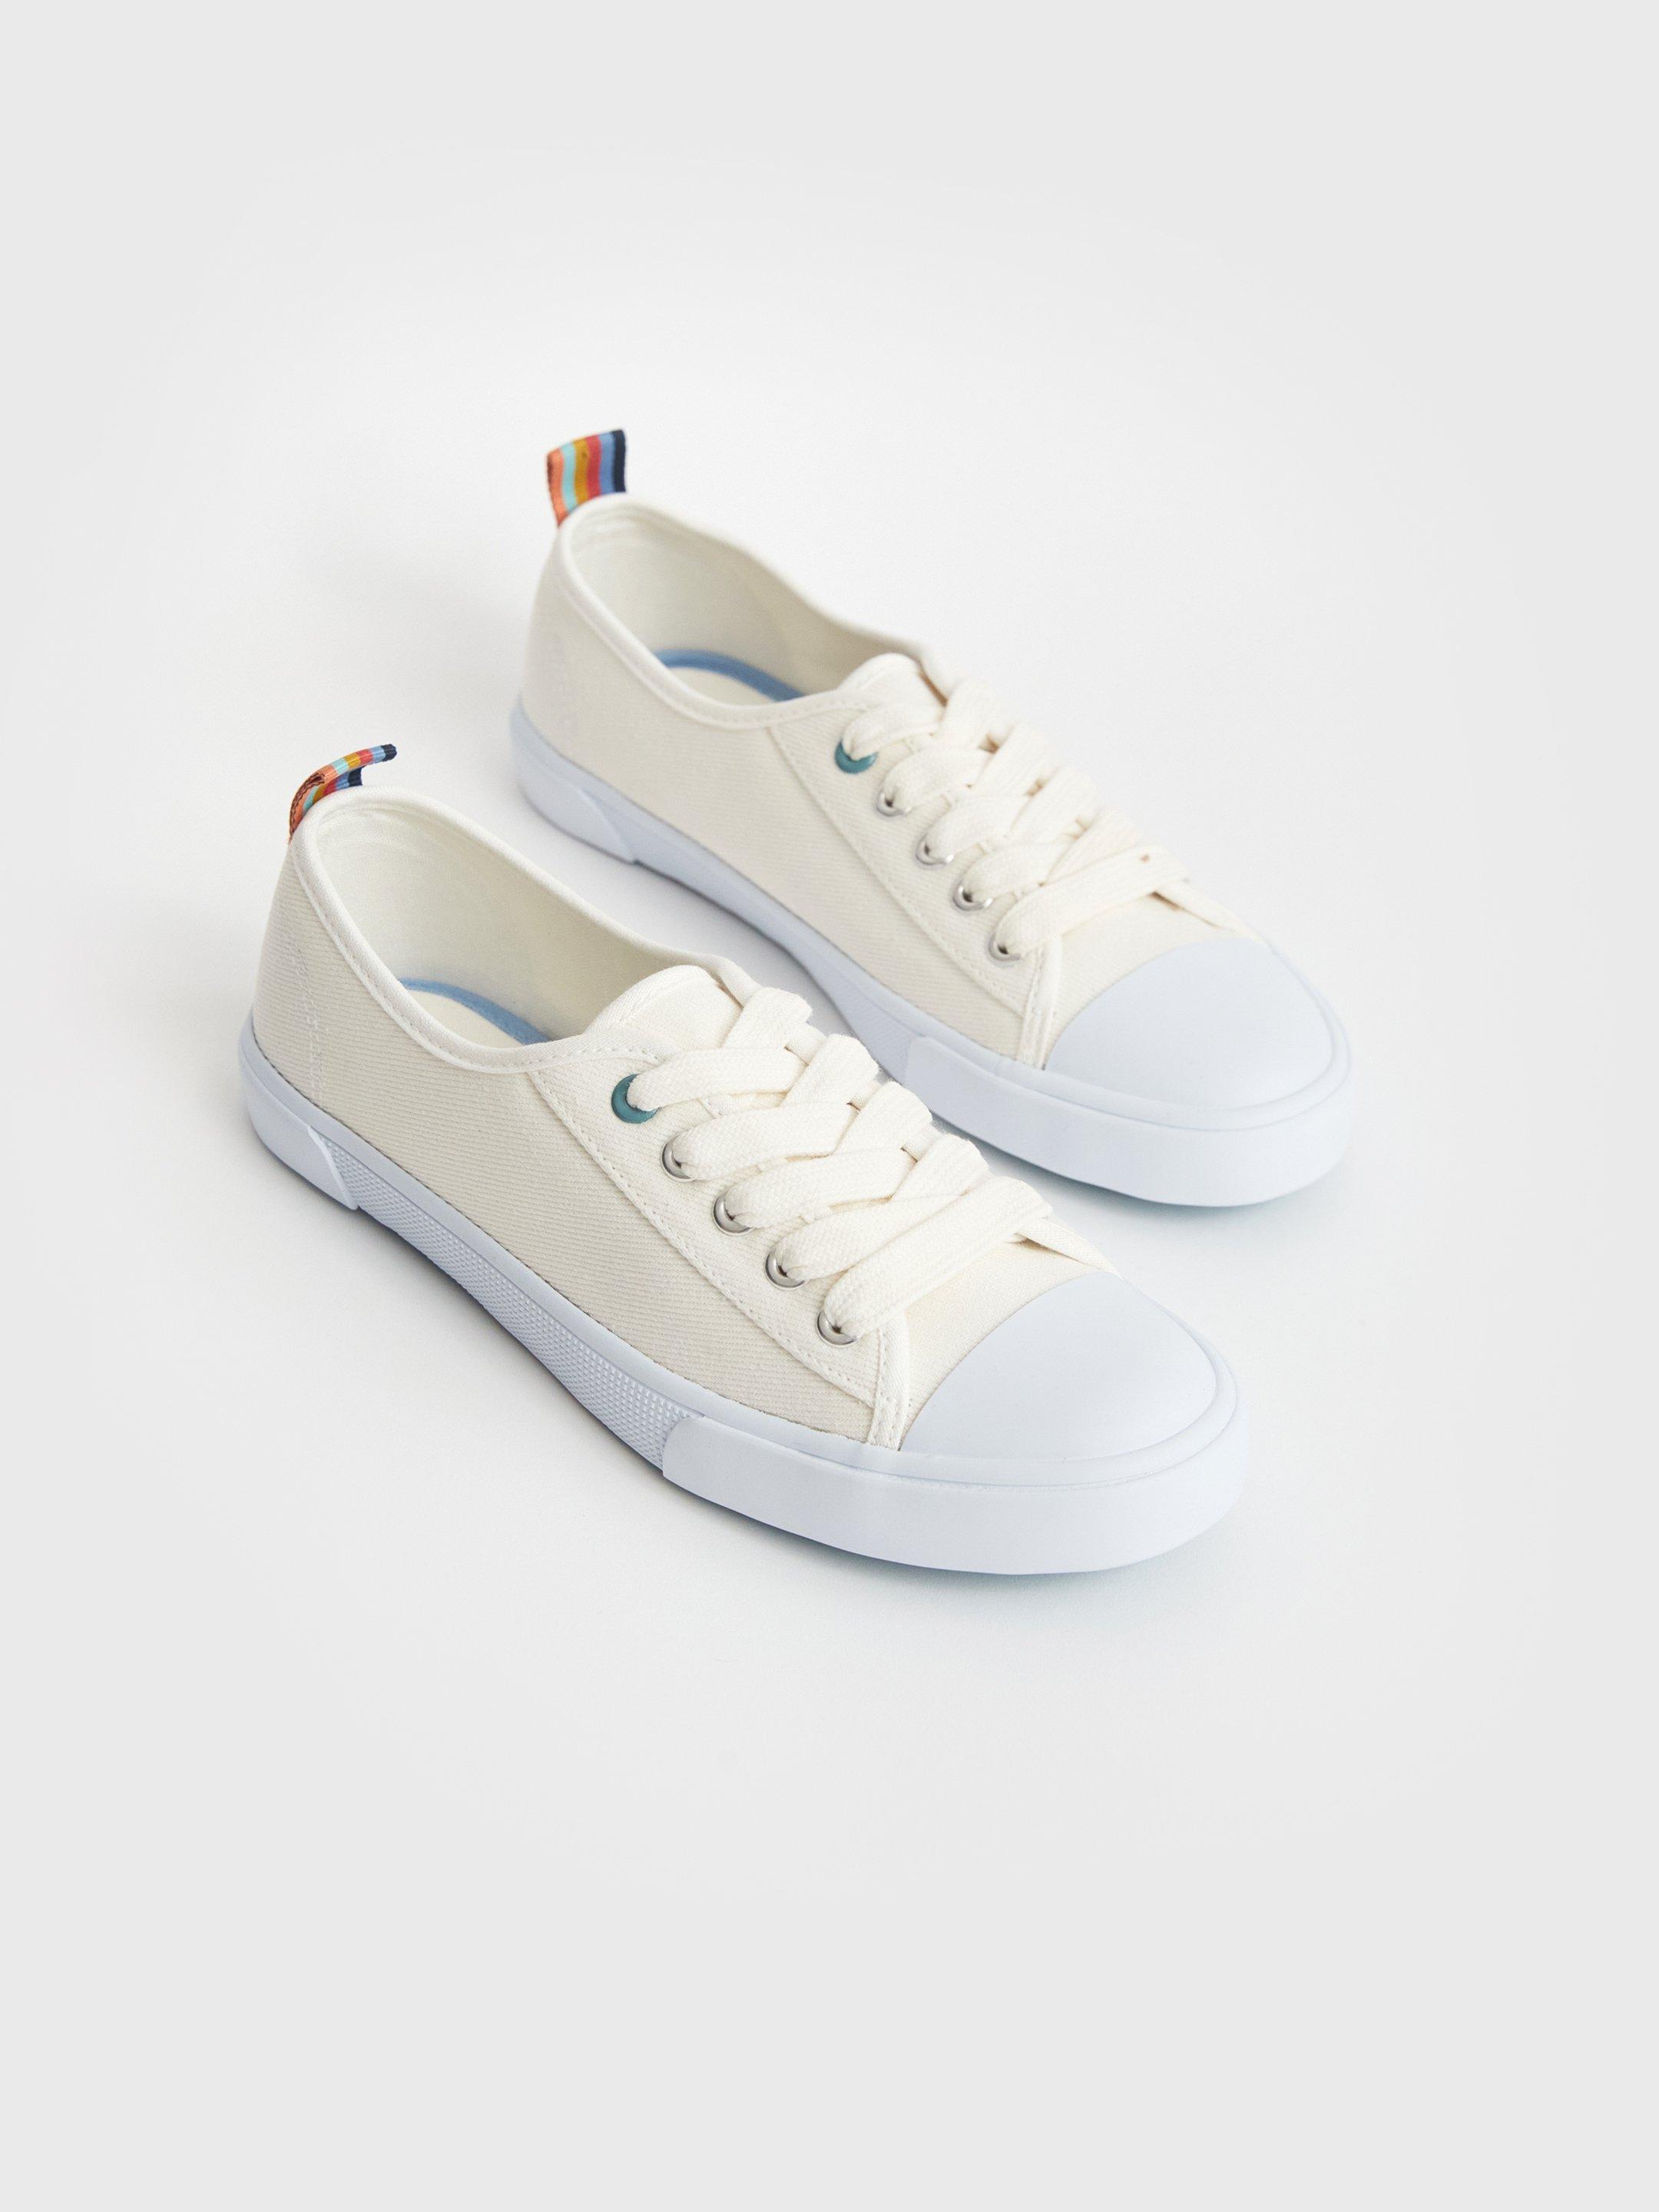 Piper Plimsolls in NAT WHITE - FLAT FRONT